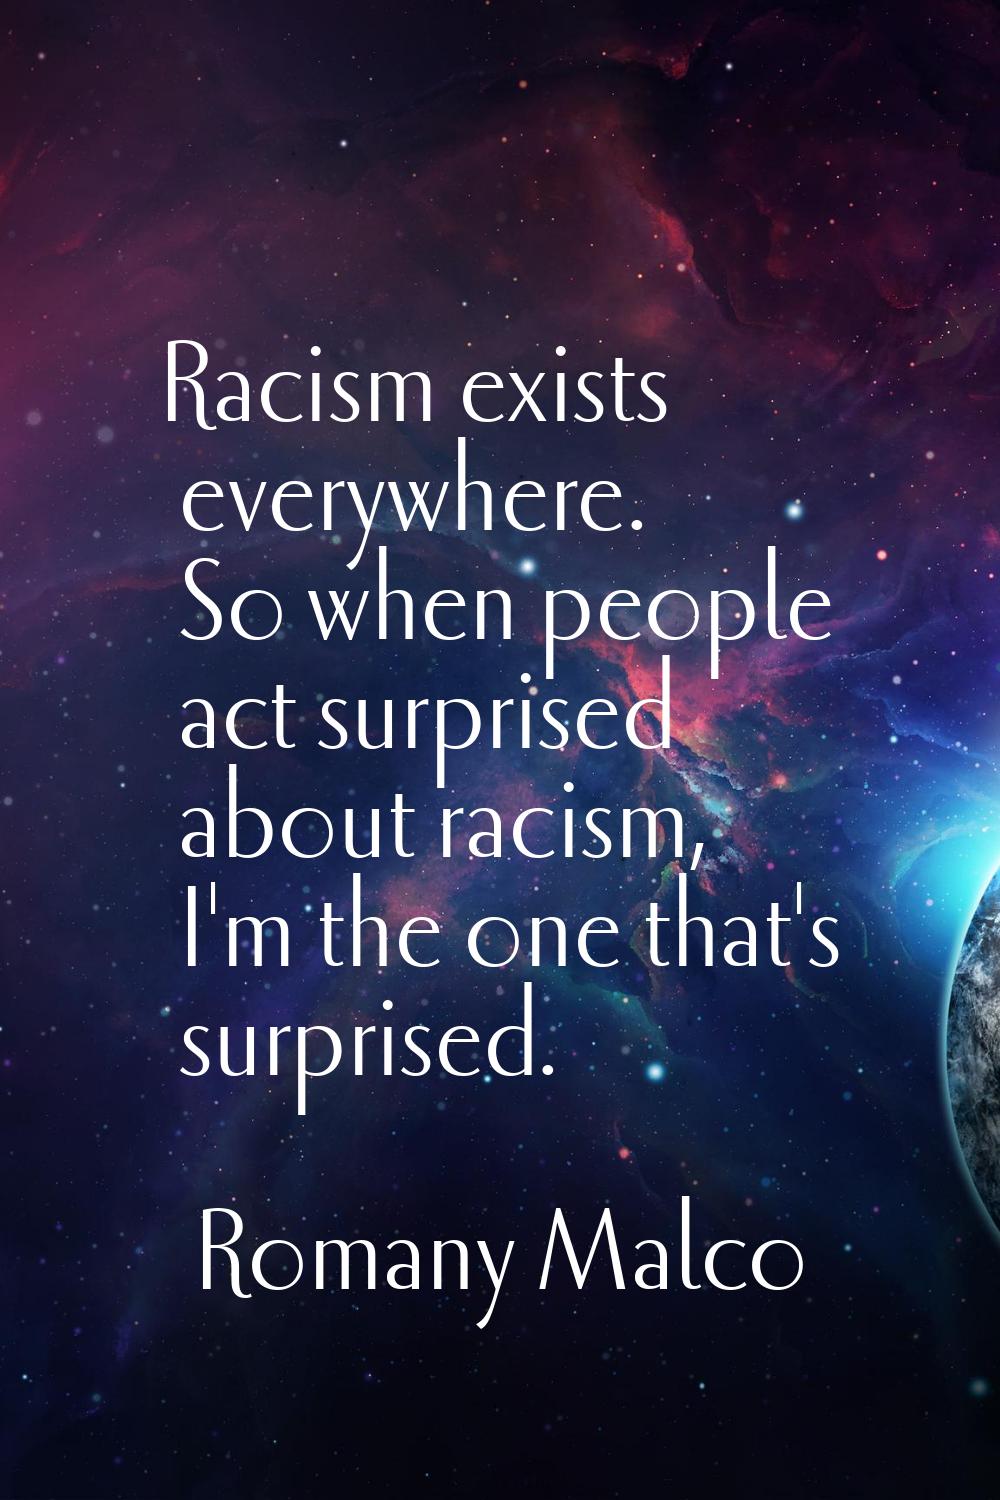 Racism exists everywhere. So when people act surprised about racism, I'm the one that's surprised.